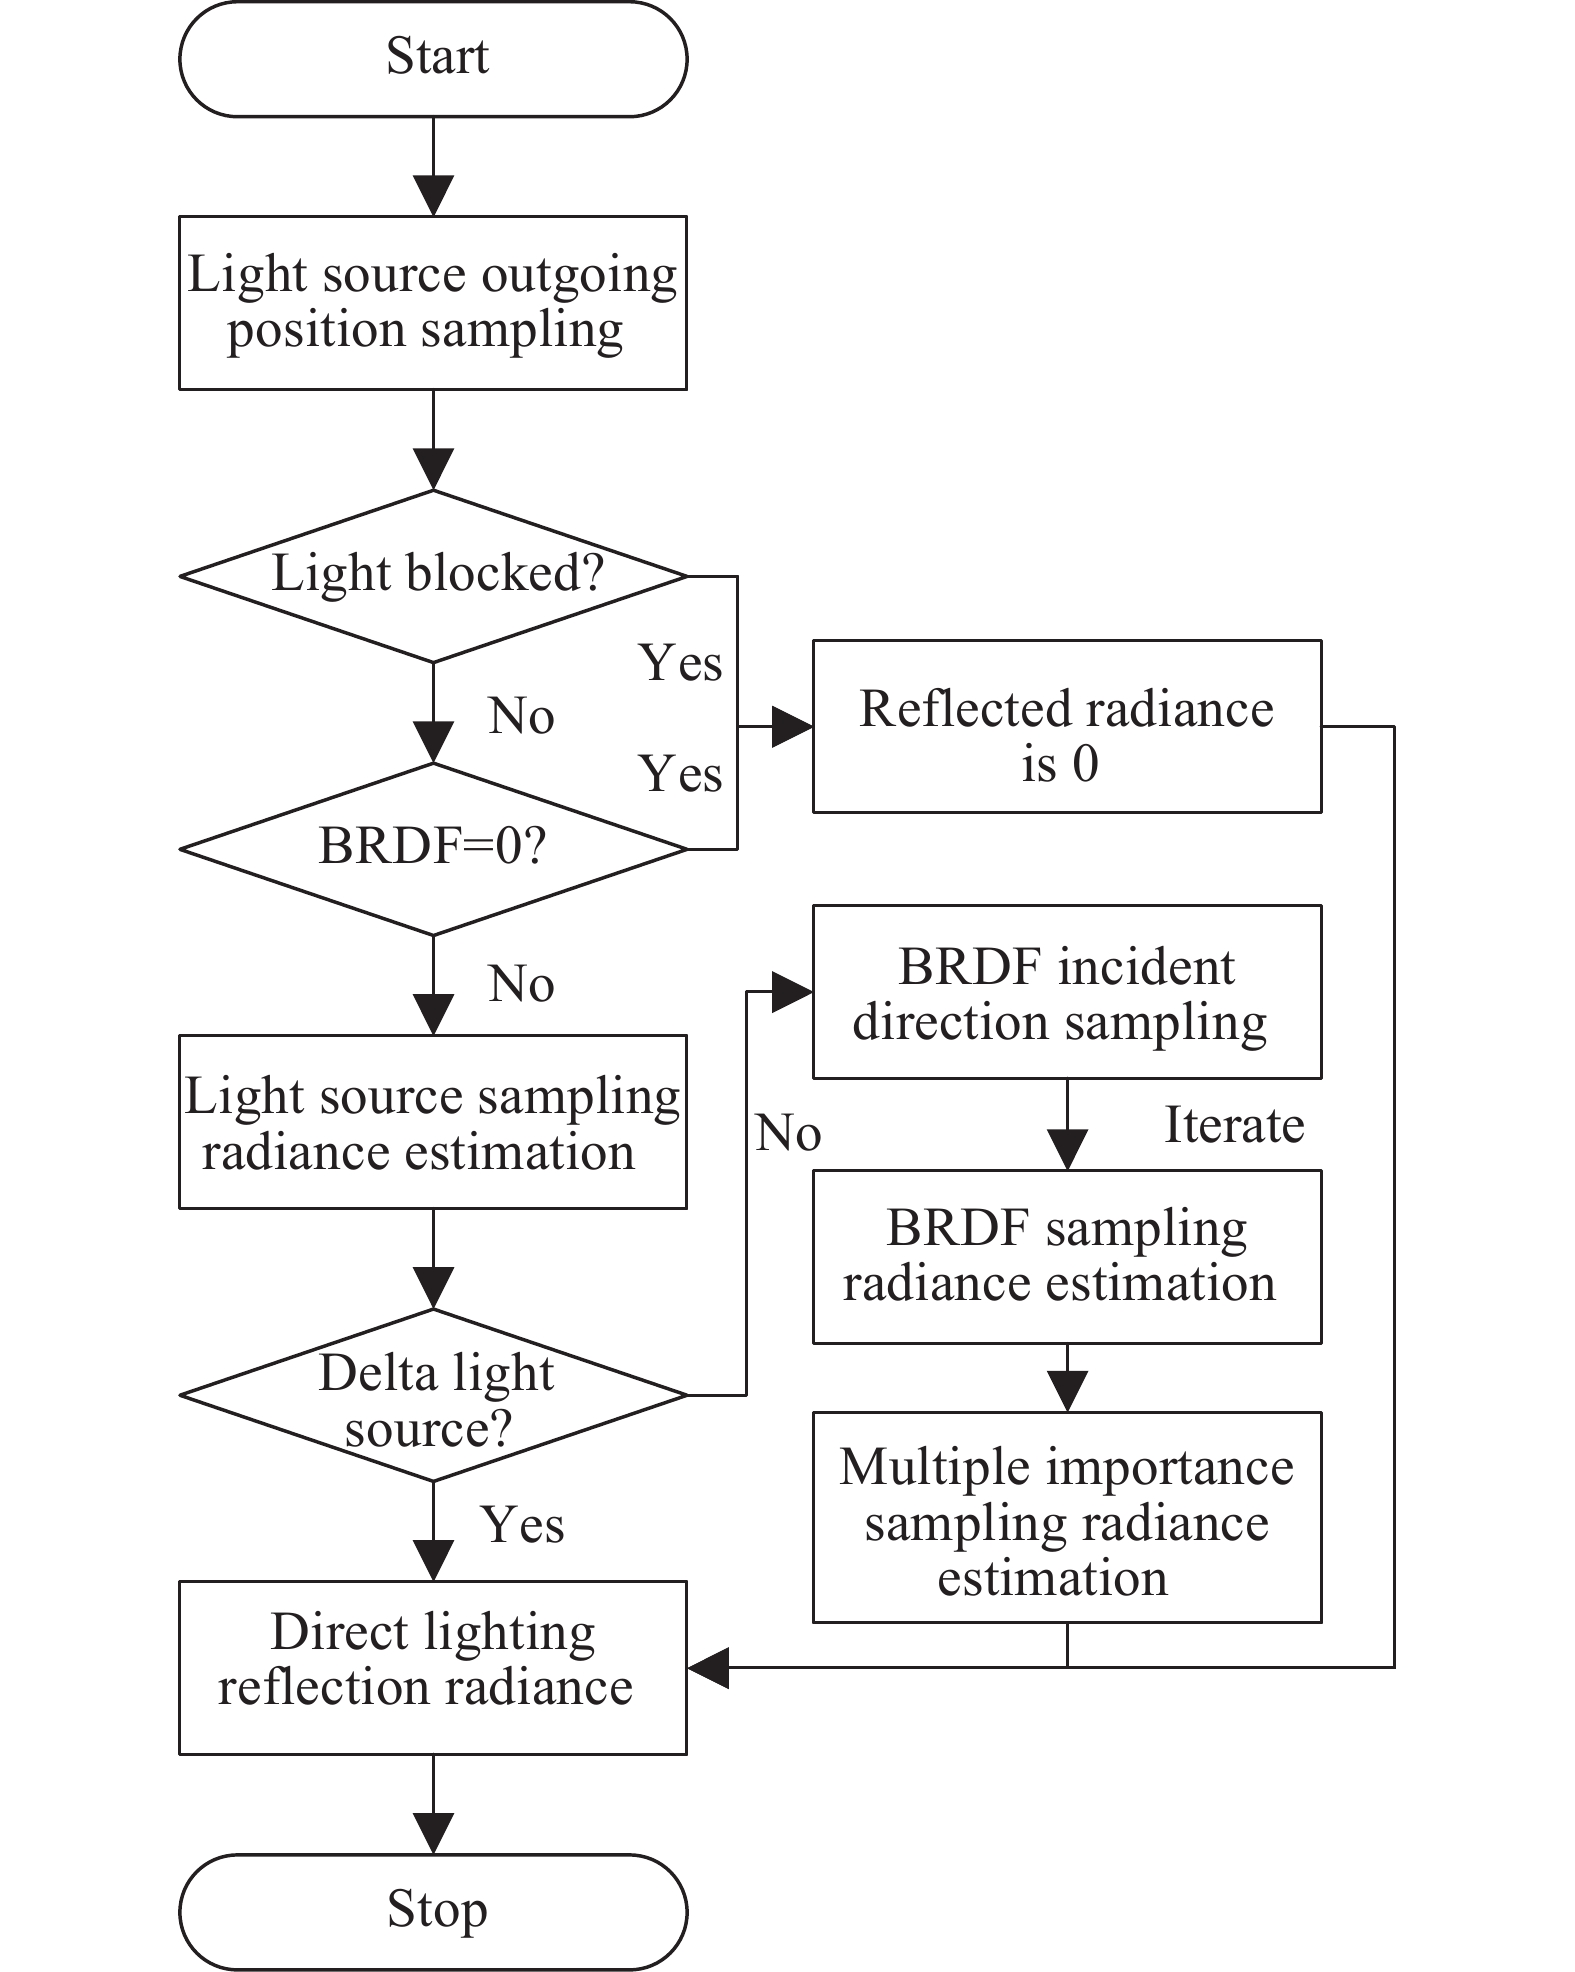 Flow chart of direct lighting reflection radiance calculation using multi-importance sampling